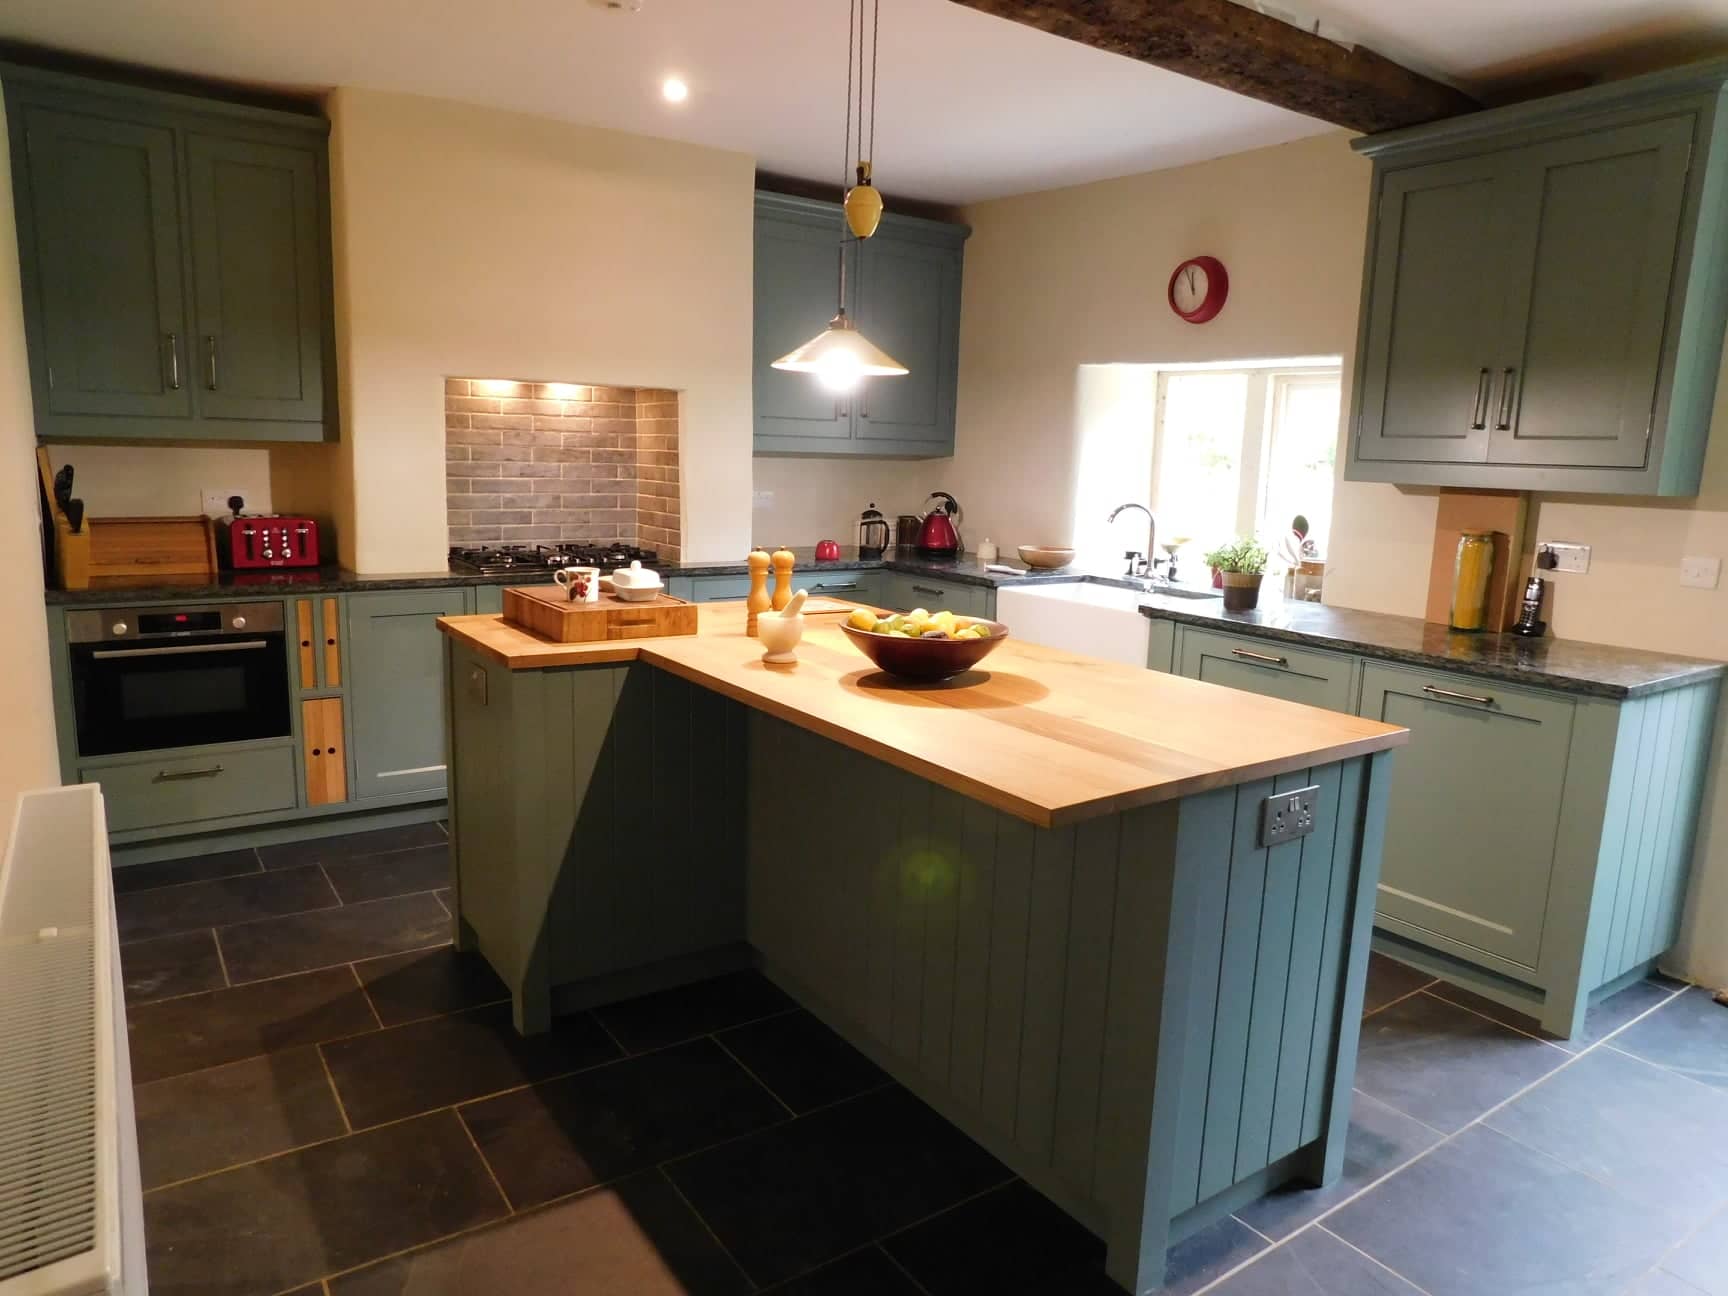 A wide view of a bespoke fitted kitchen